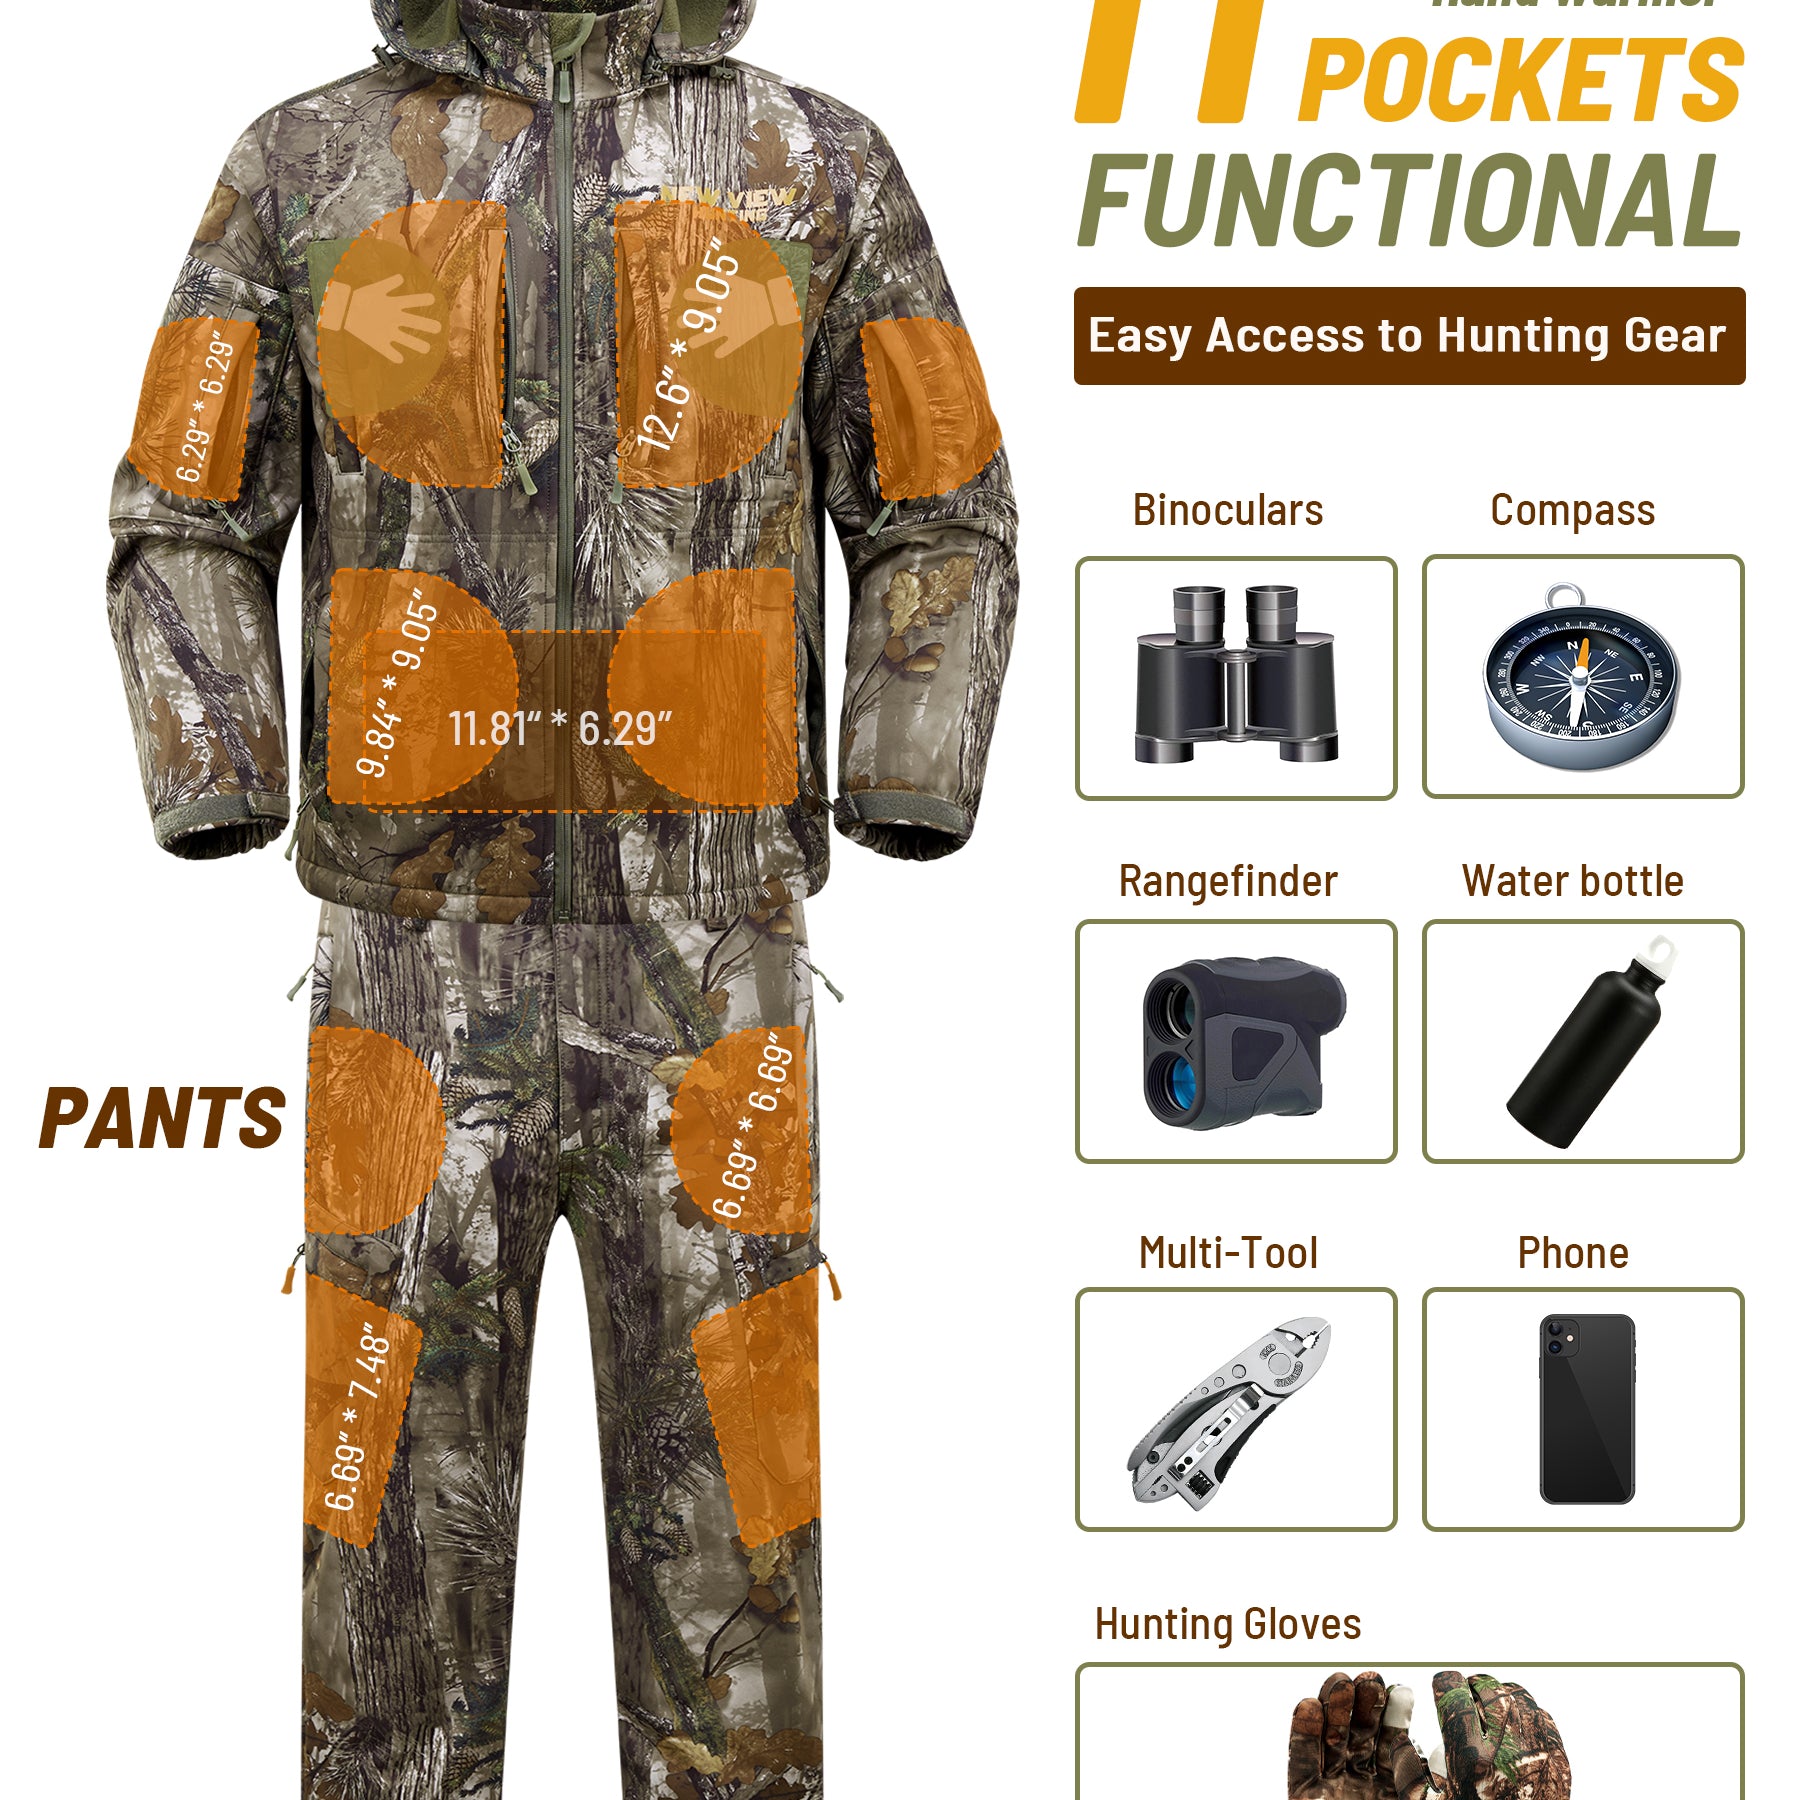 the hunting suit provides 13 pockets